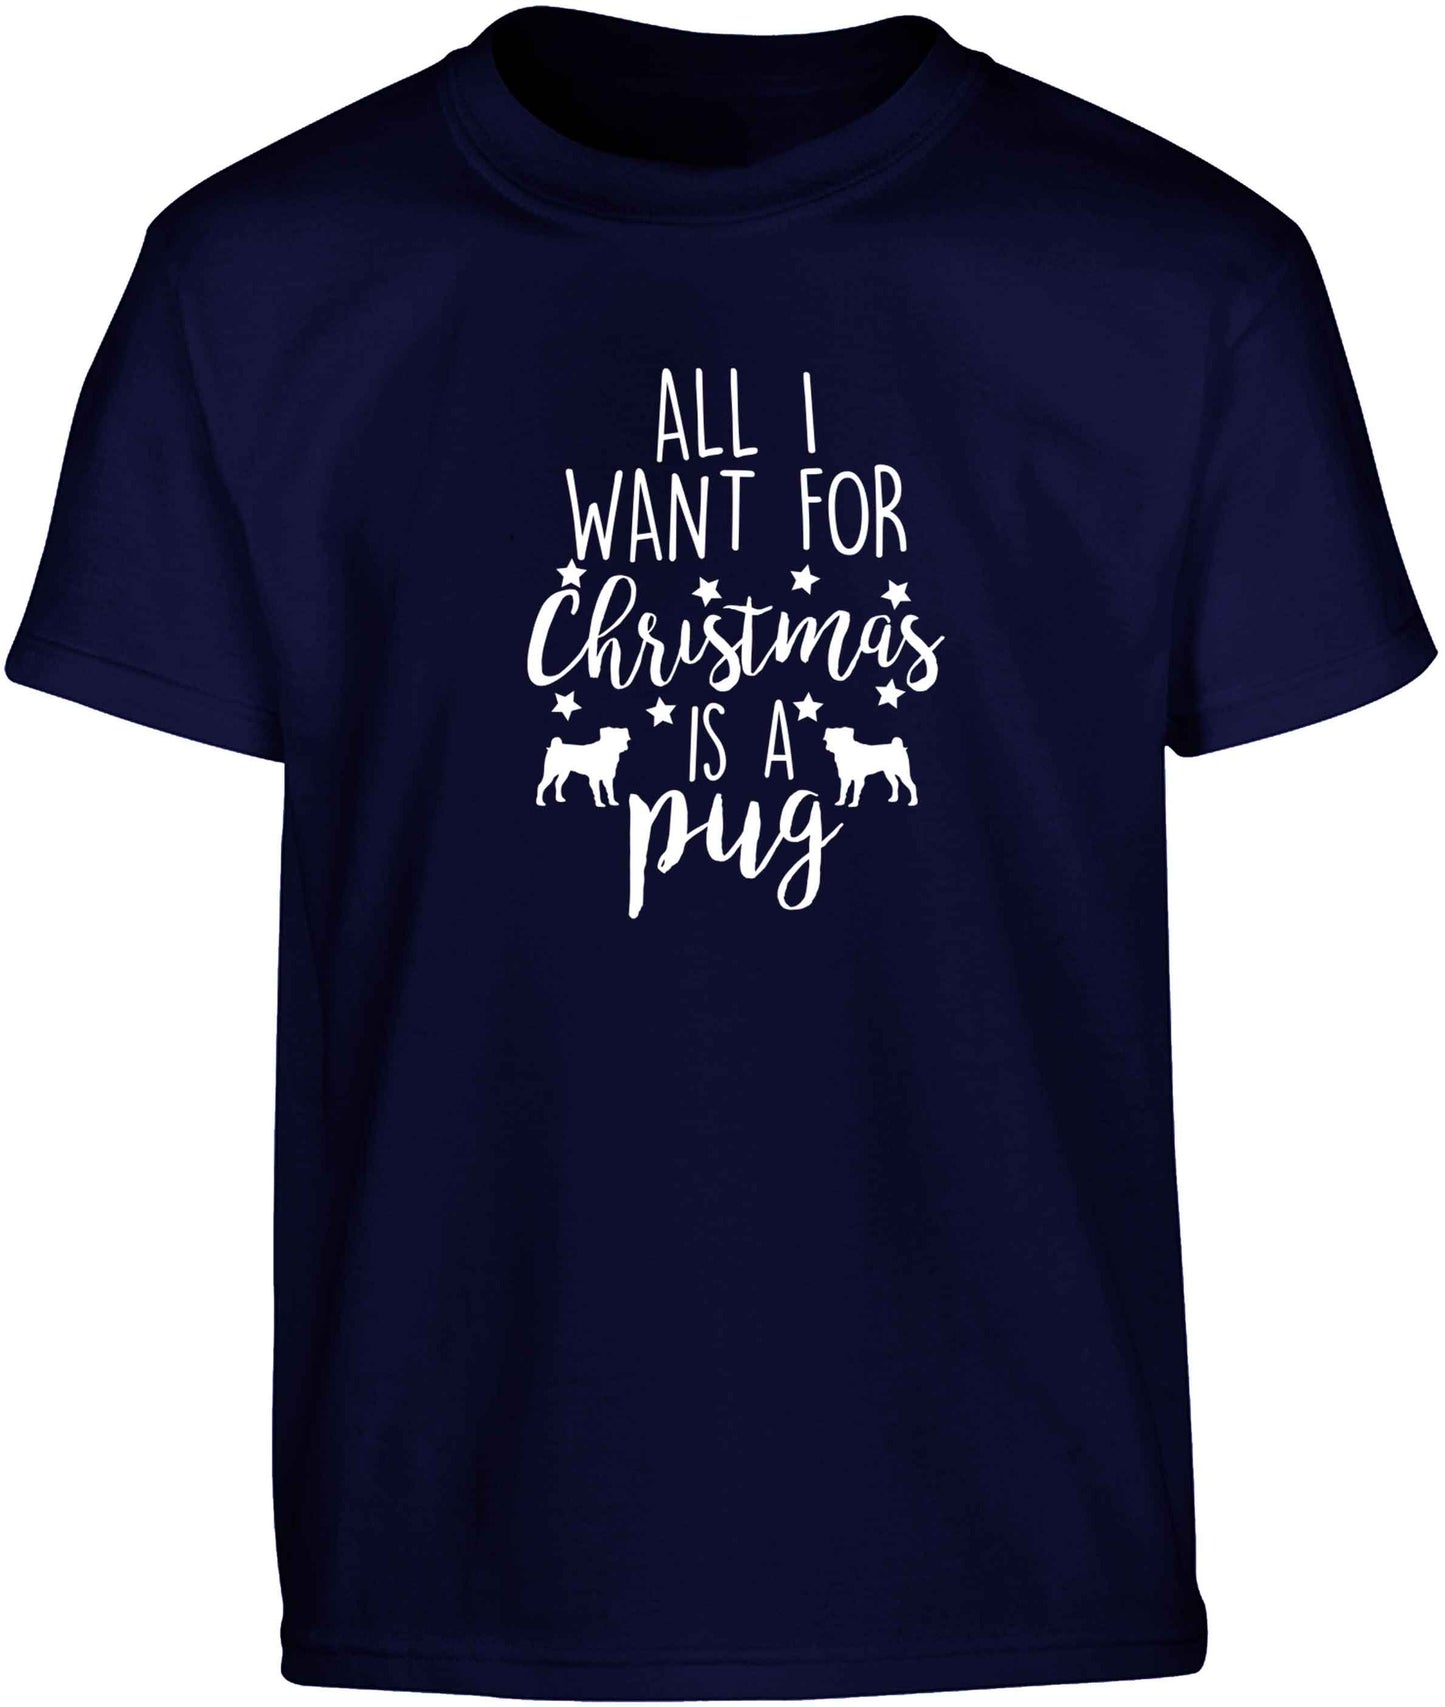 All I want for Christmas is a pug Children's navy Tshirt 12-13 Years